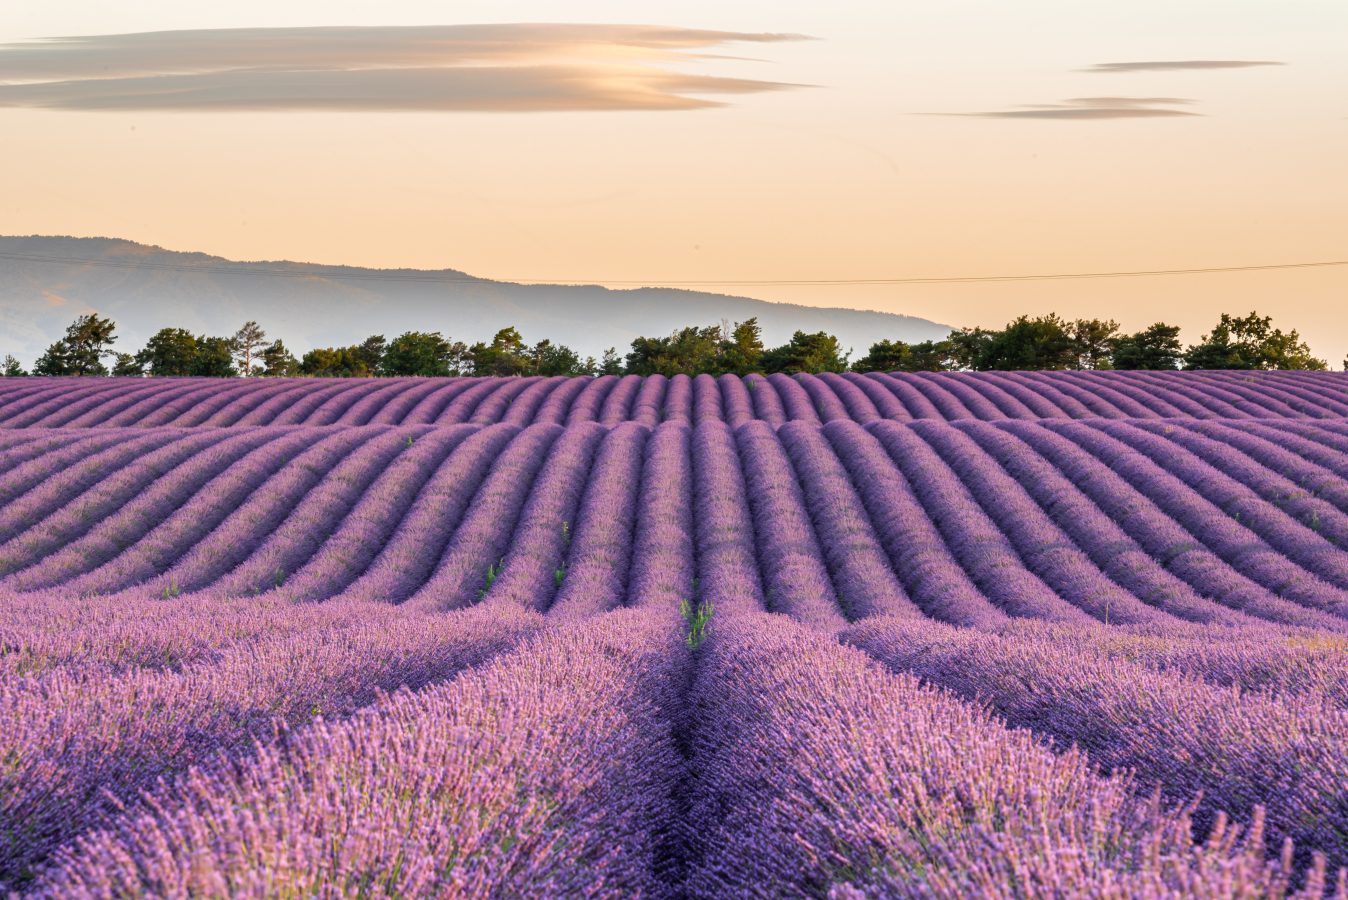 Lavender field in France during sunset with mountains in the background.